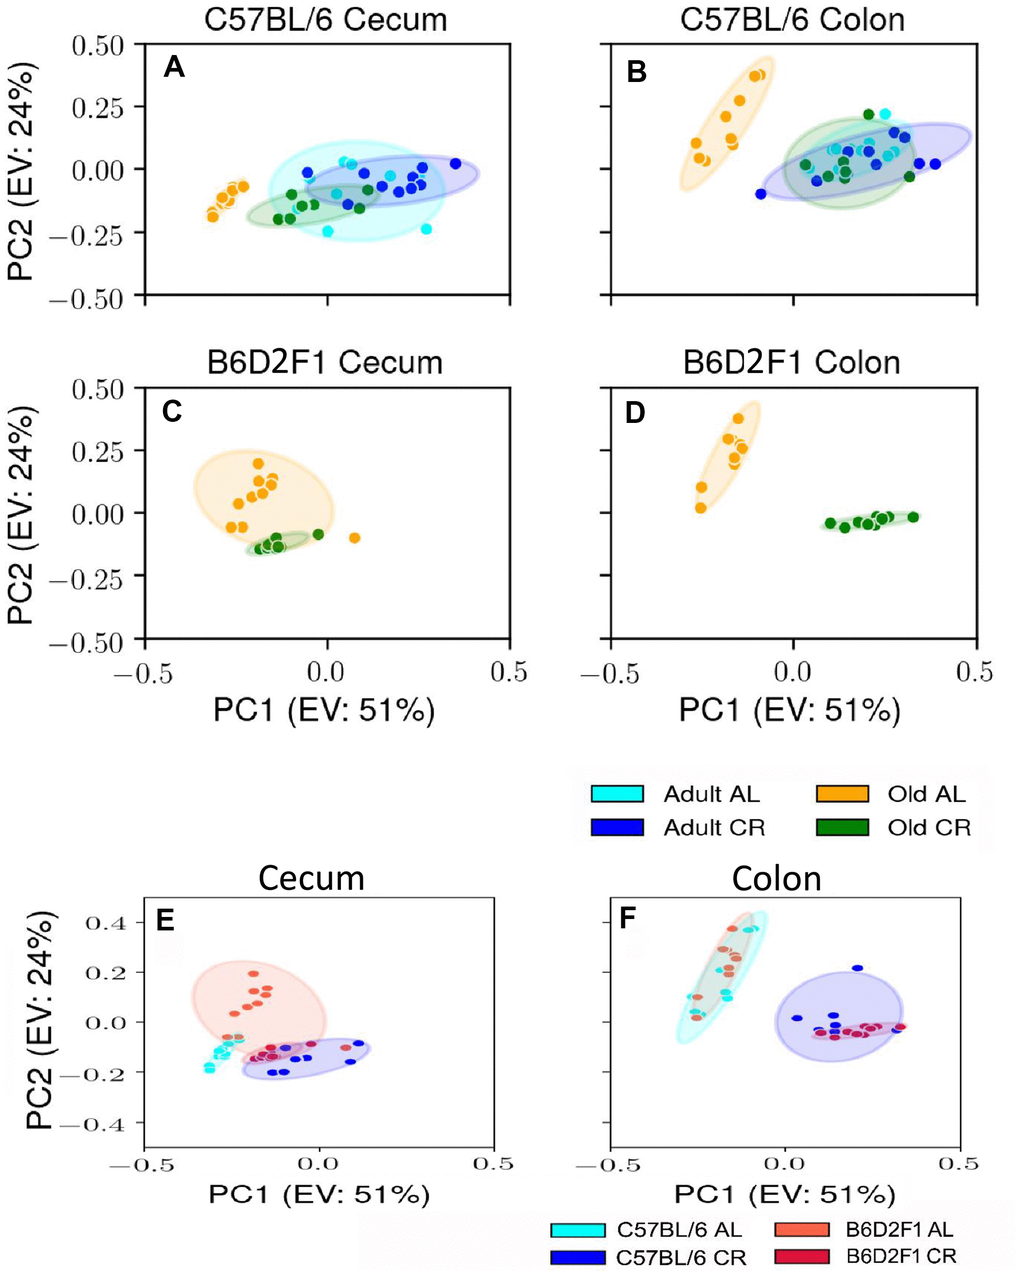 PCA plots showing the variance in the microbiome of mice fed AL and CR. The PCA plots are shown for the microbiome from the cecum (A) and colon (B) of adult and old C57BL/6JN mice fed AL or CR and from the cecum (C) and colon (D)of old B6D2F1 mice fed AL or CR. Panels (E, F) show PCA plots of the microbiome from the cecum and colon, respectively for old C57BL/6JN and B6D2F1 mice fed AL and CR. Ellipses are 95% confidence intervals for the group obtained using bootstrapping, and "EV: XX%" in the axis labels is the percentage of explained variance of the component.